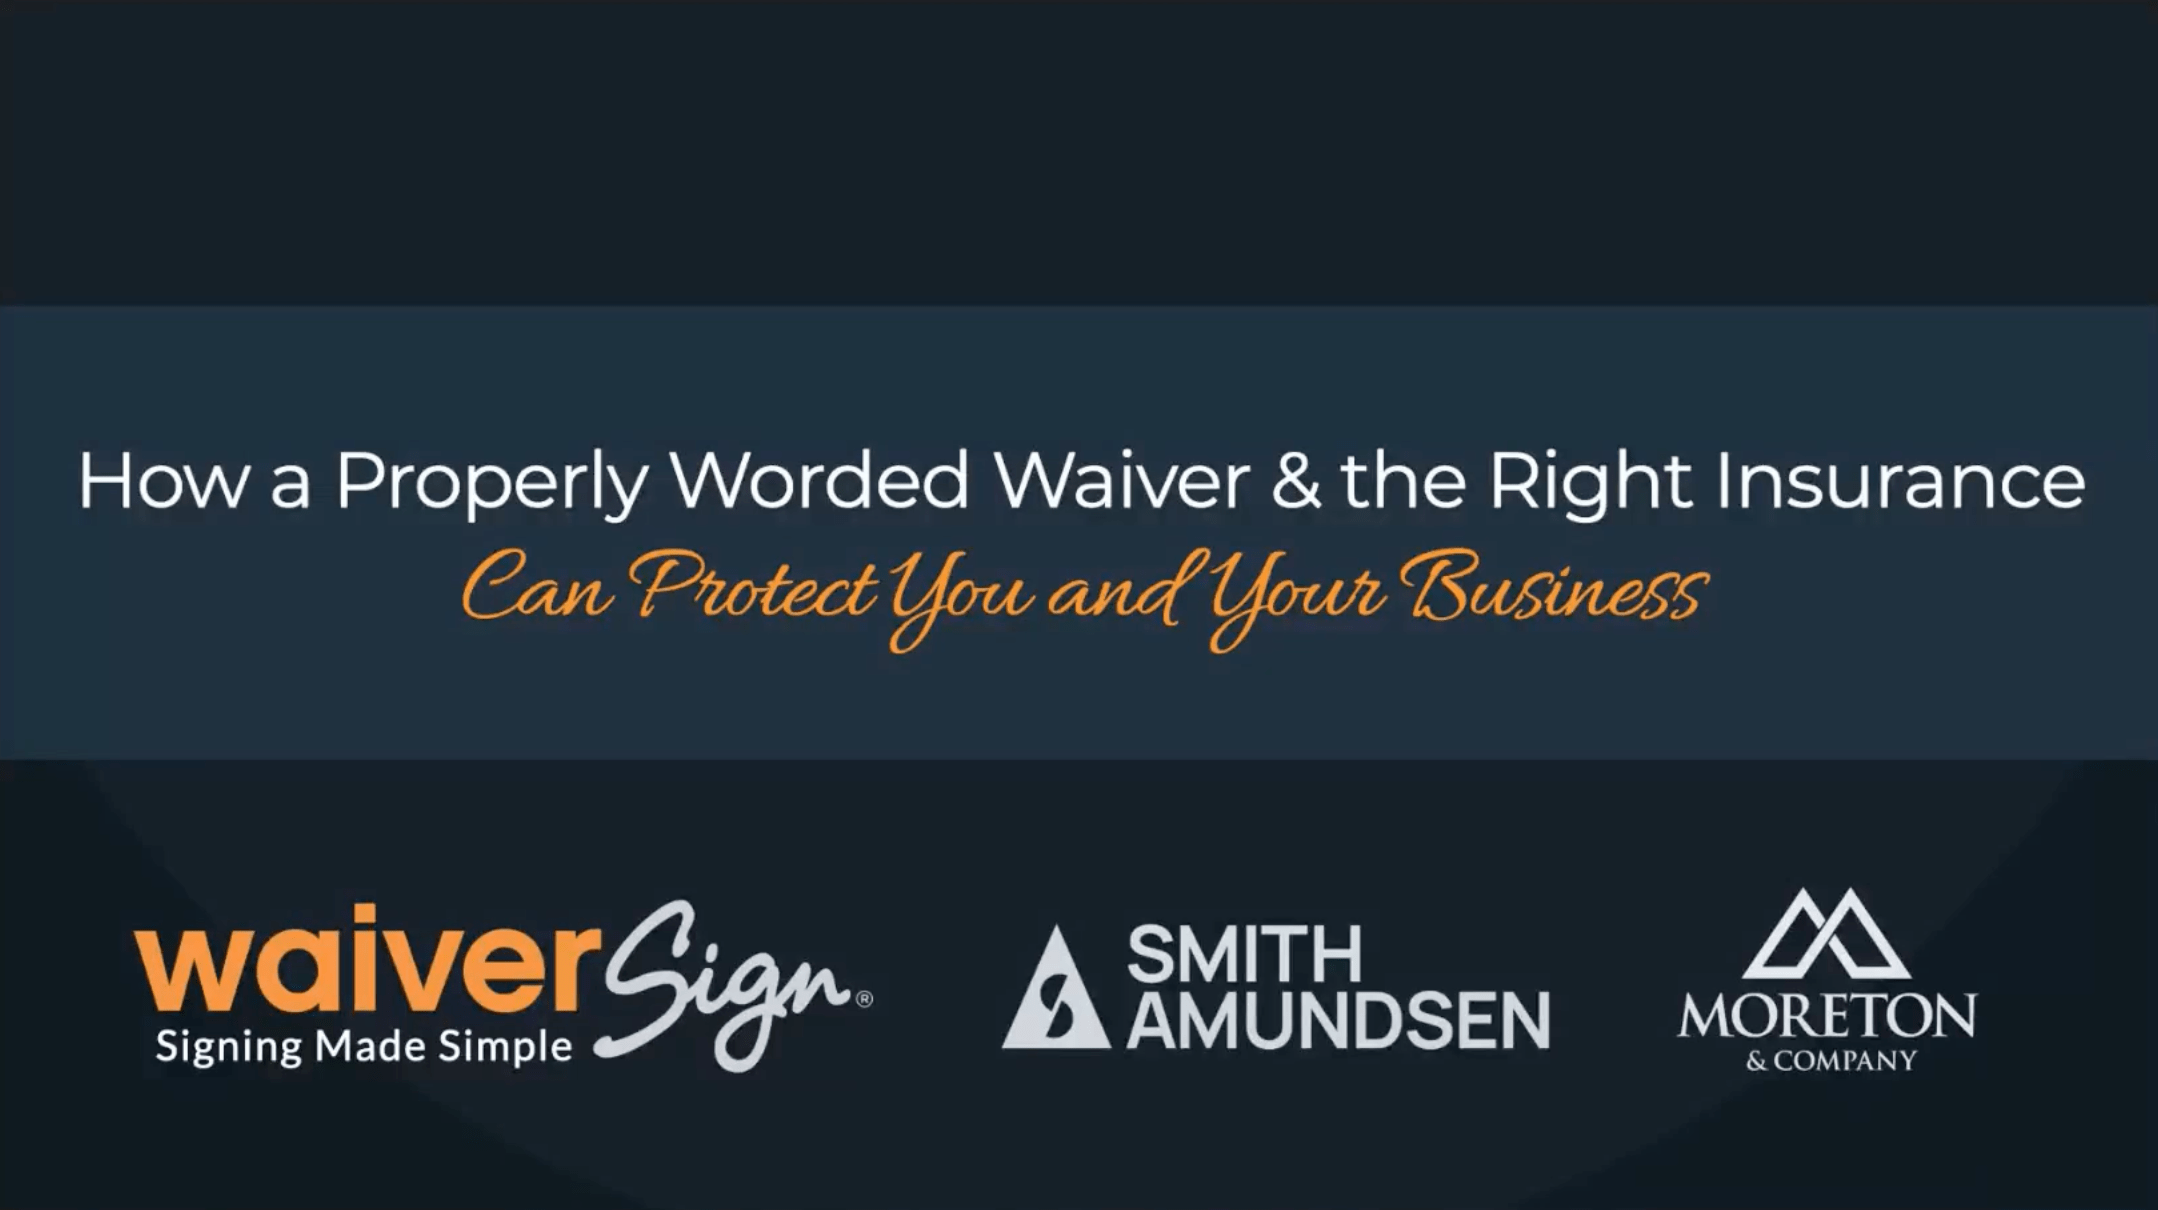 How a Properly Worded Waiver the Right Insurance Can Protect Your Business